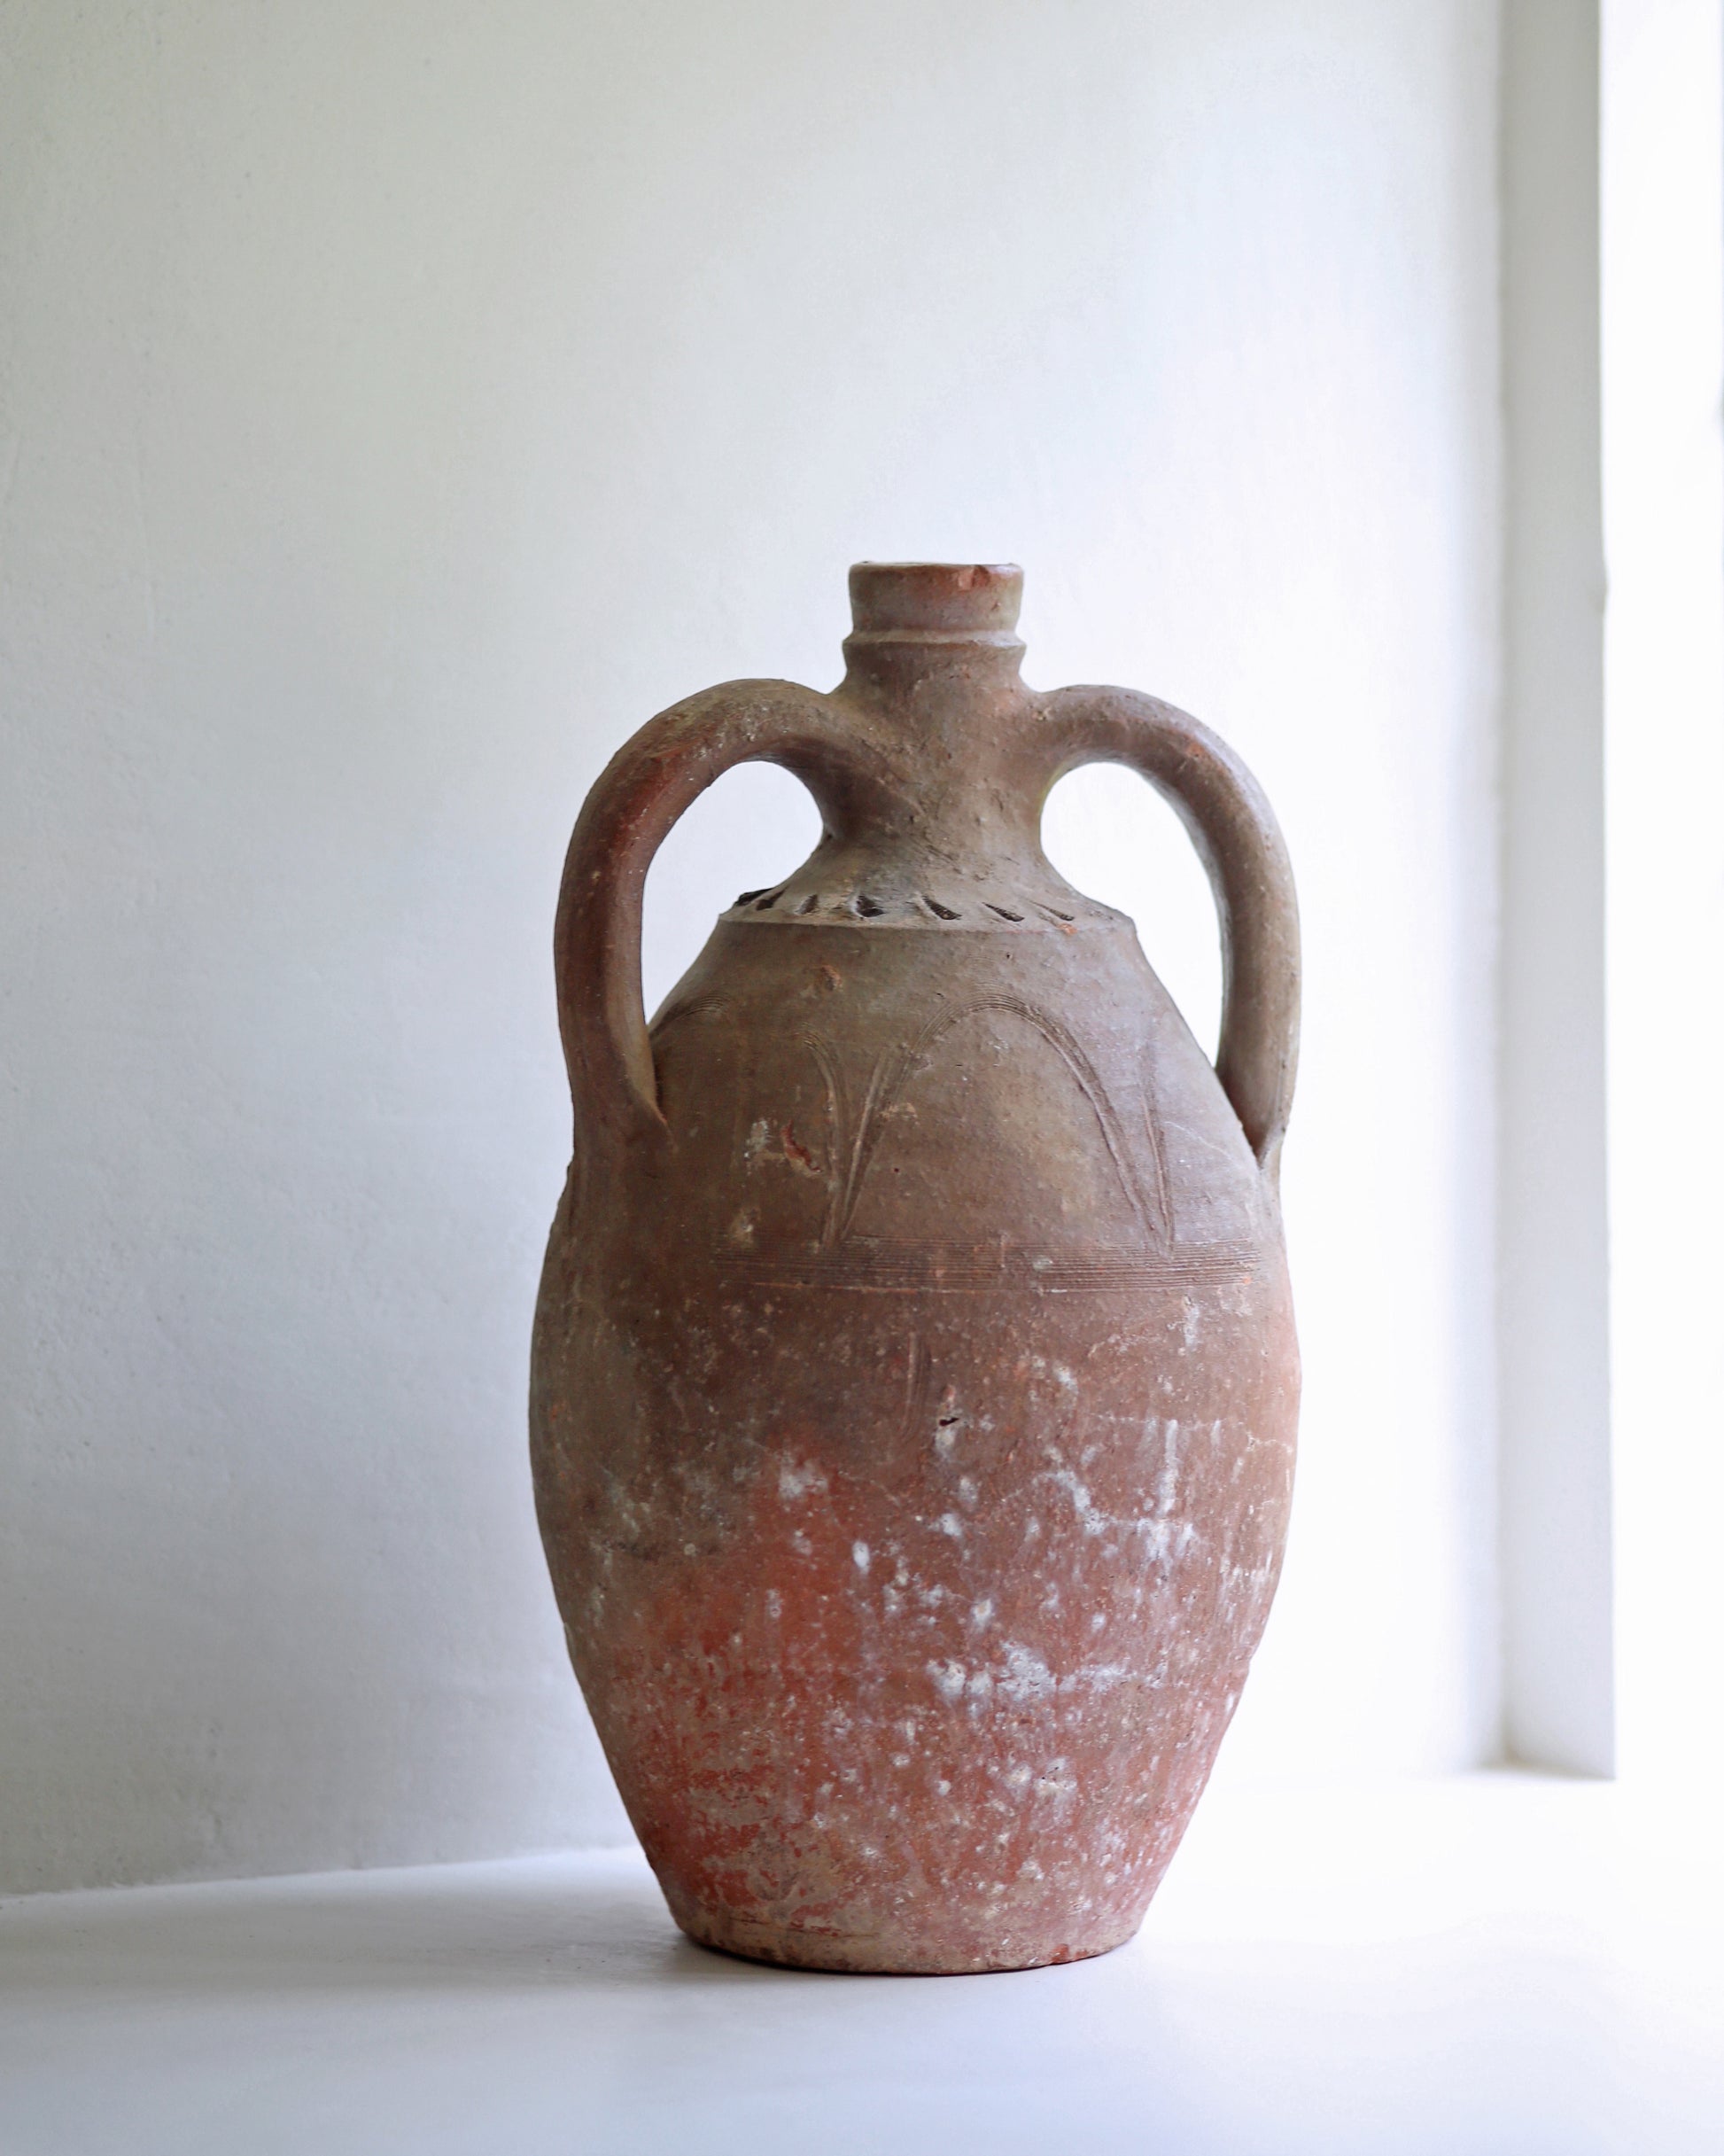 Decorative antique Turkish amphora with two curved handles